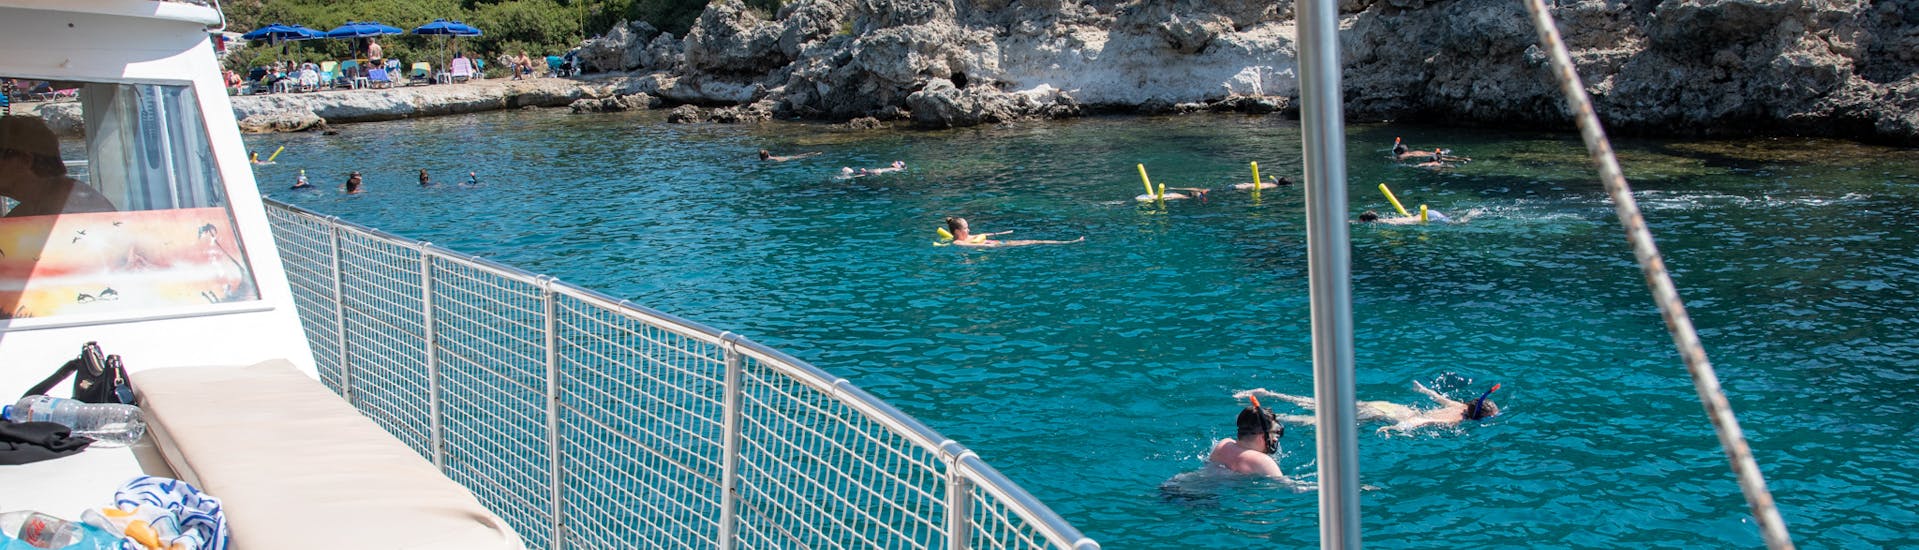 People swimming in turquoise blue water during the Private Boat Trip from Faliraki to Anthony Quinn Bay with Snorkeling with Sofia Sea Cruises Faliraki.